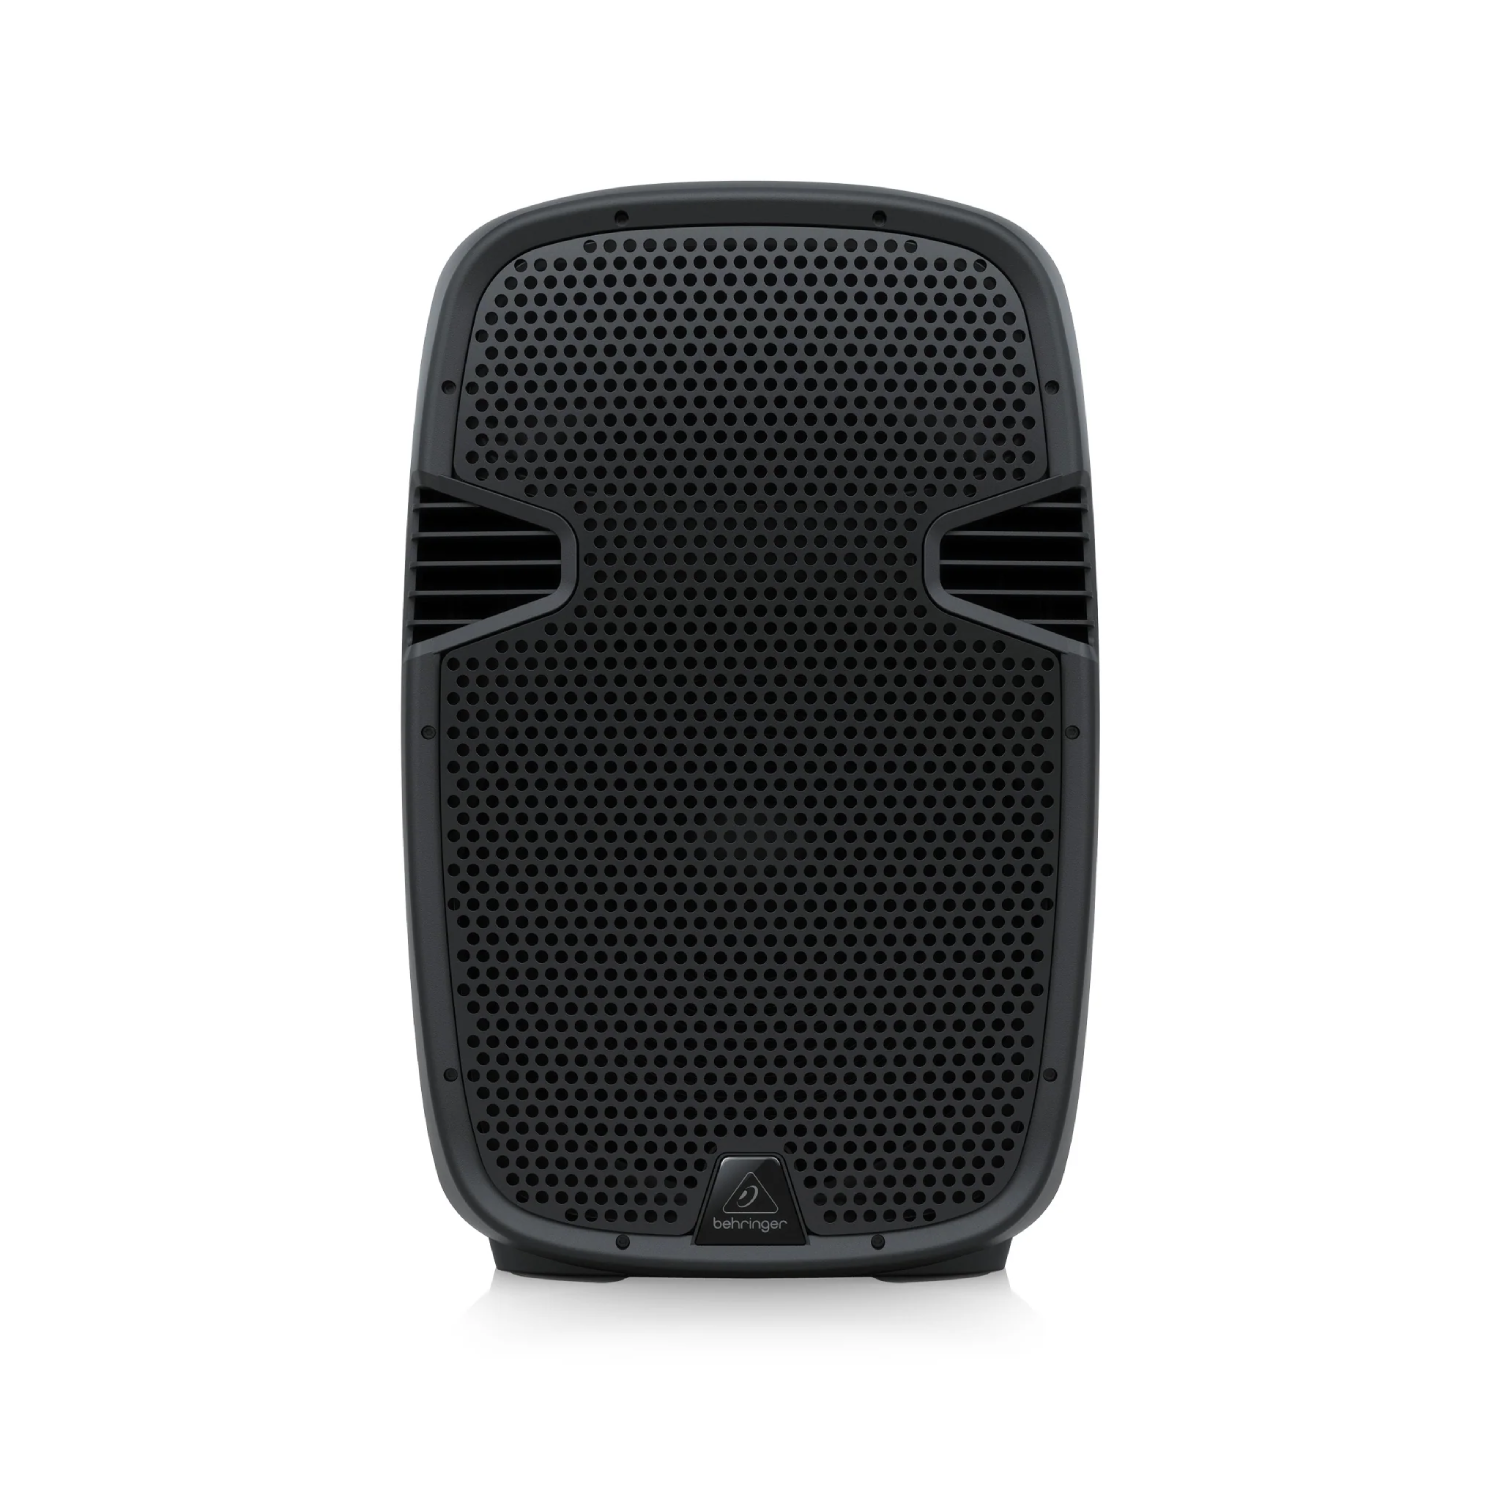 Behringer PK115A 800W 15-inch Powered Speaker with Bluetooth